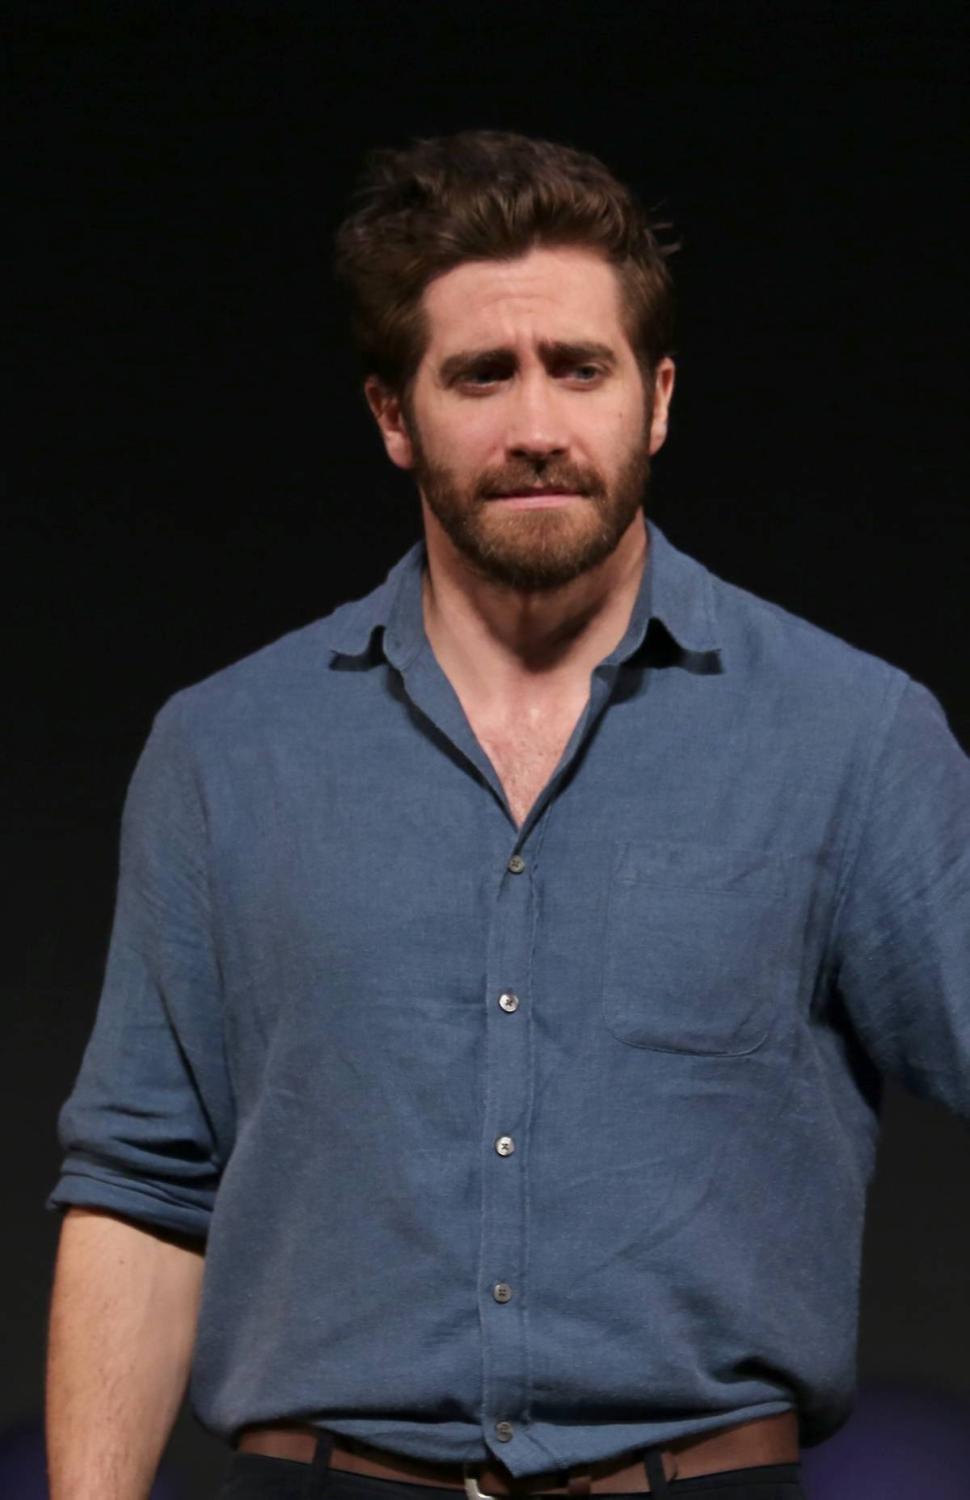 Fiddy’s 'Southpaw' co-star Jake Gyllenhaal opened 'Constellations' at the Samuel J. Friedman Theatre on Tuesday night to rave reviews.